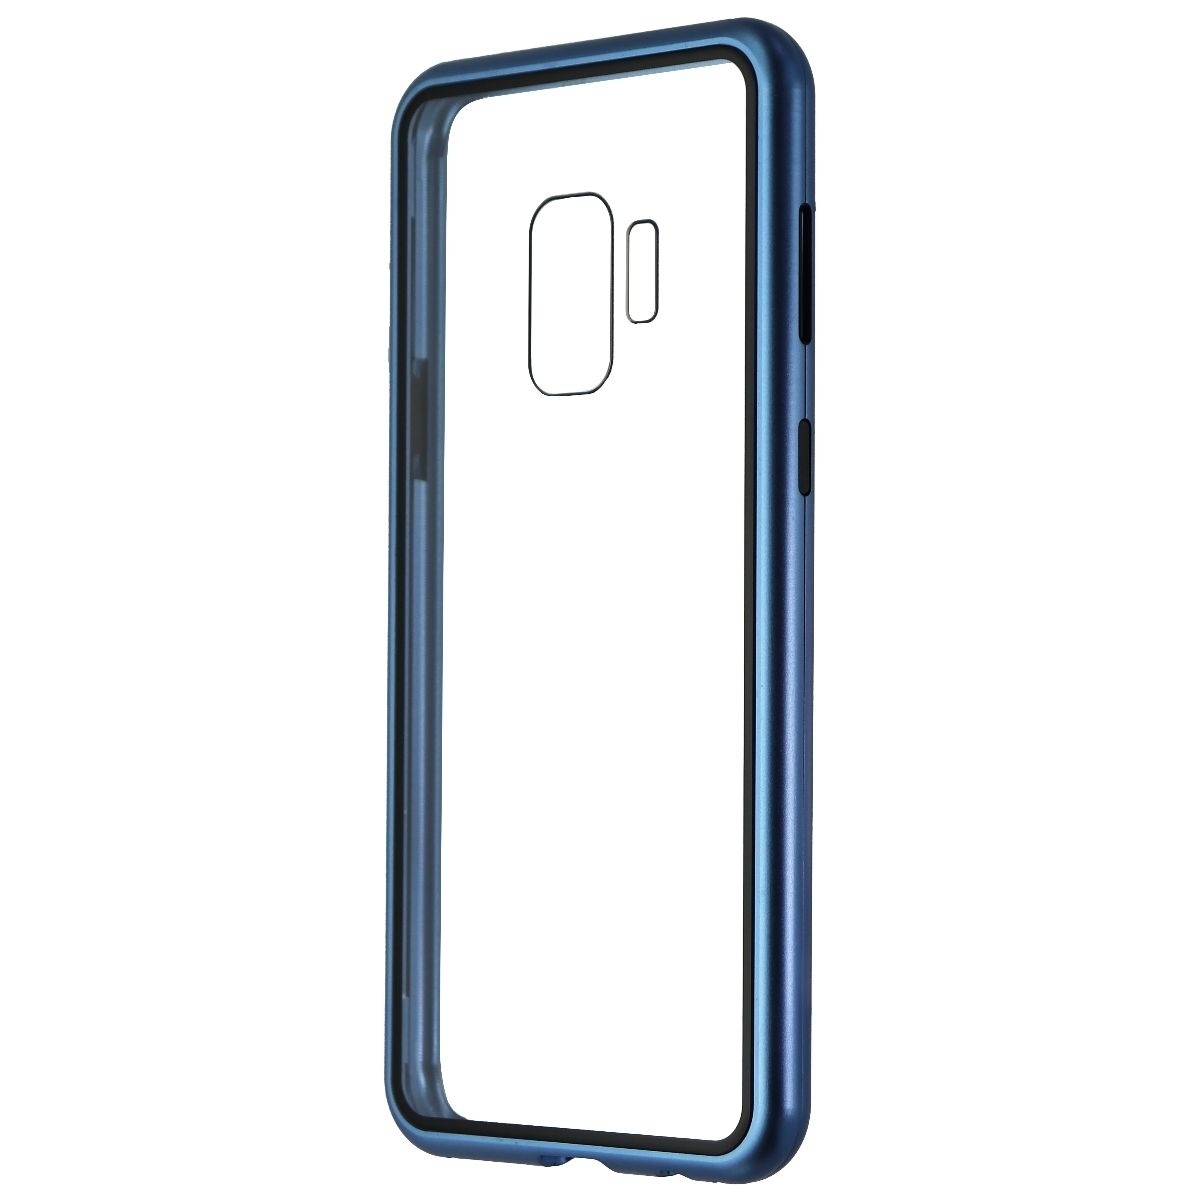 Zore Hybrid Glass Series Case For Samsung Galaxy S9 - Clear/Blue